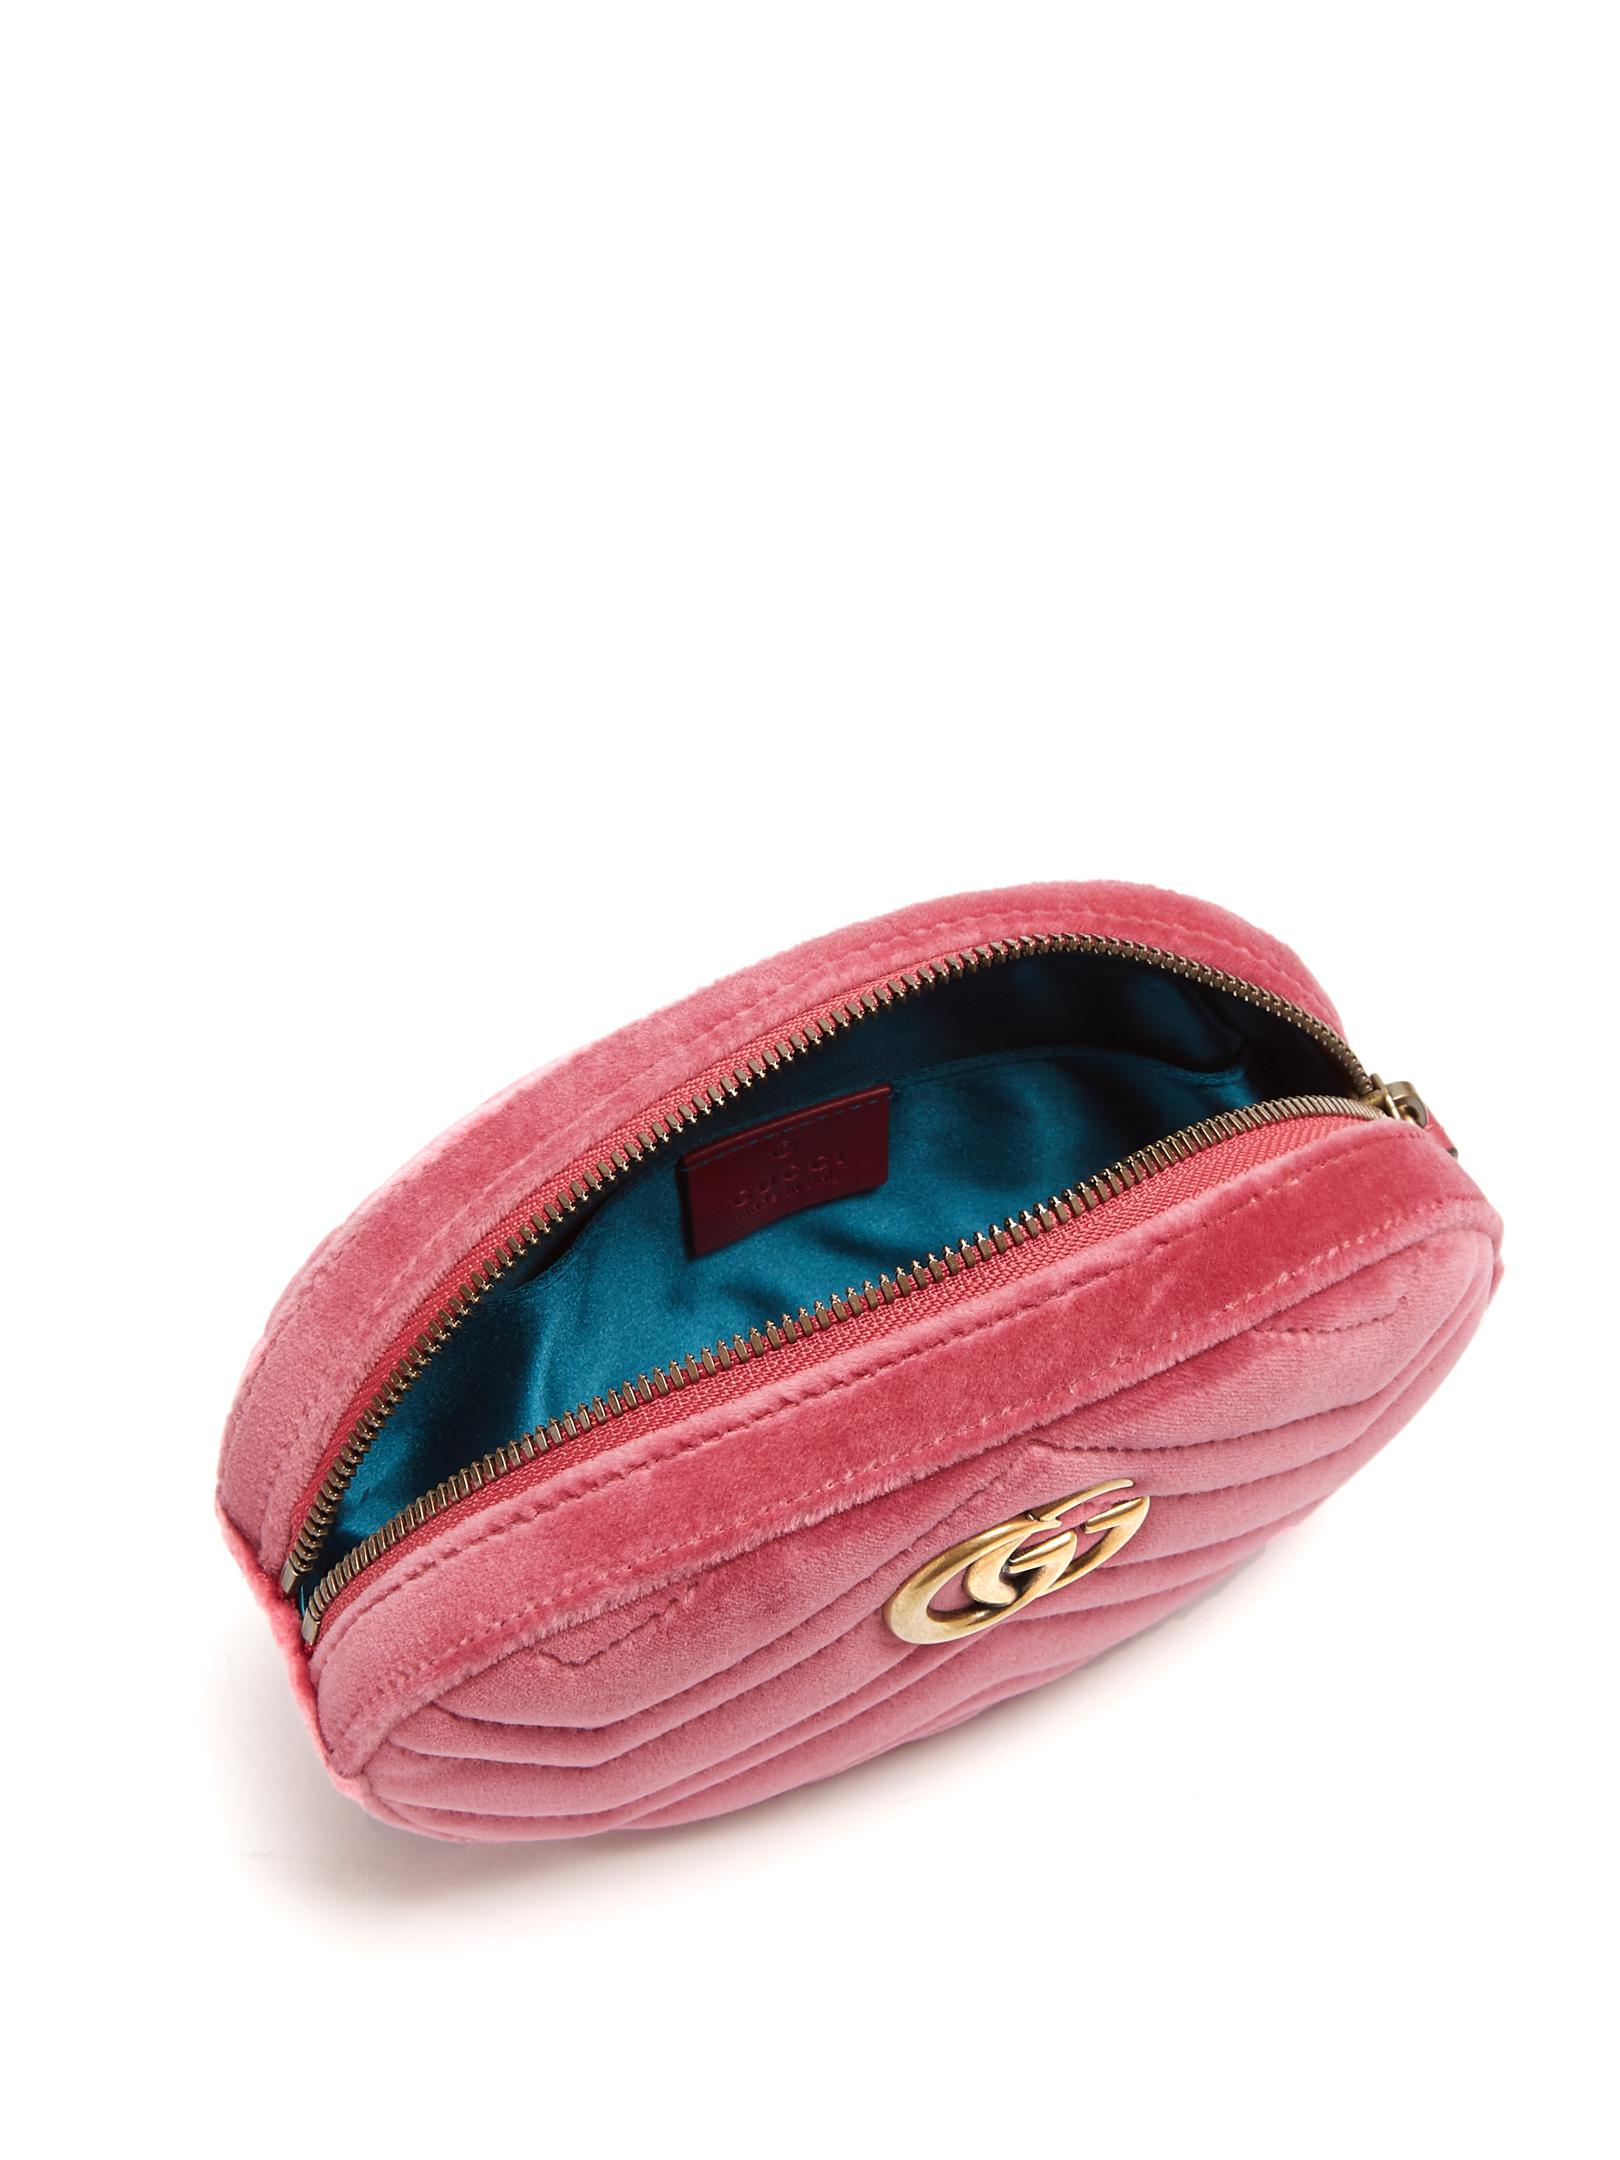 Gucci Gg Marmont Quilted-velvet Belt Bag in Light Pink (Pink) - Lyst